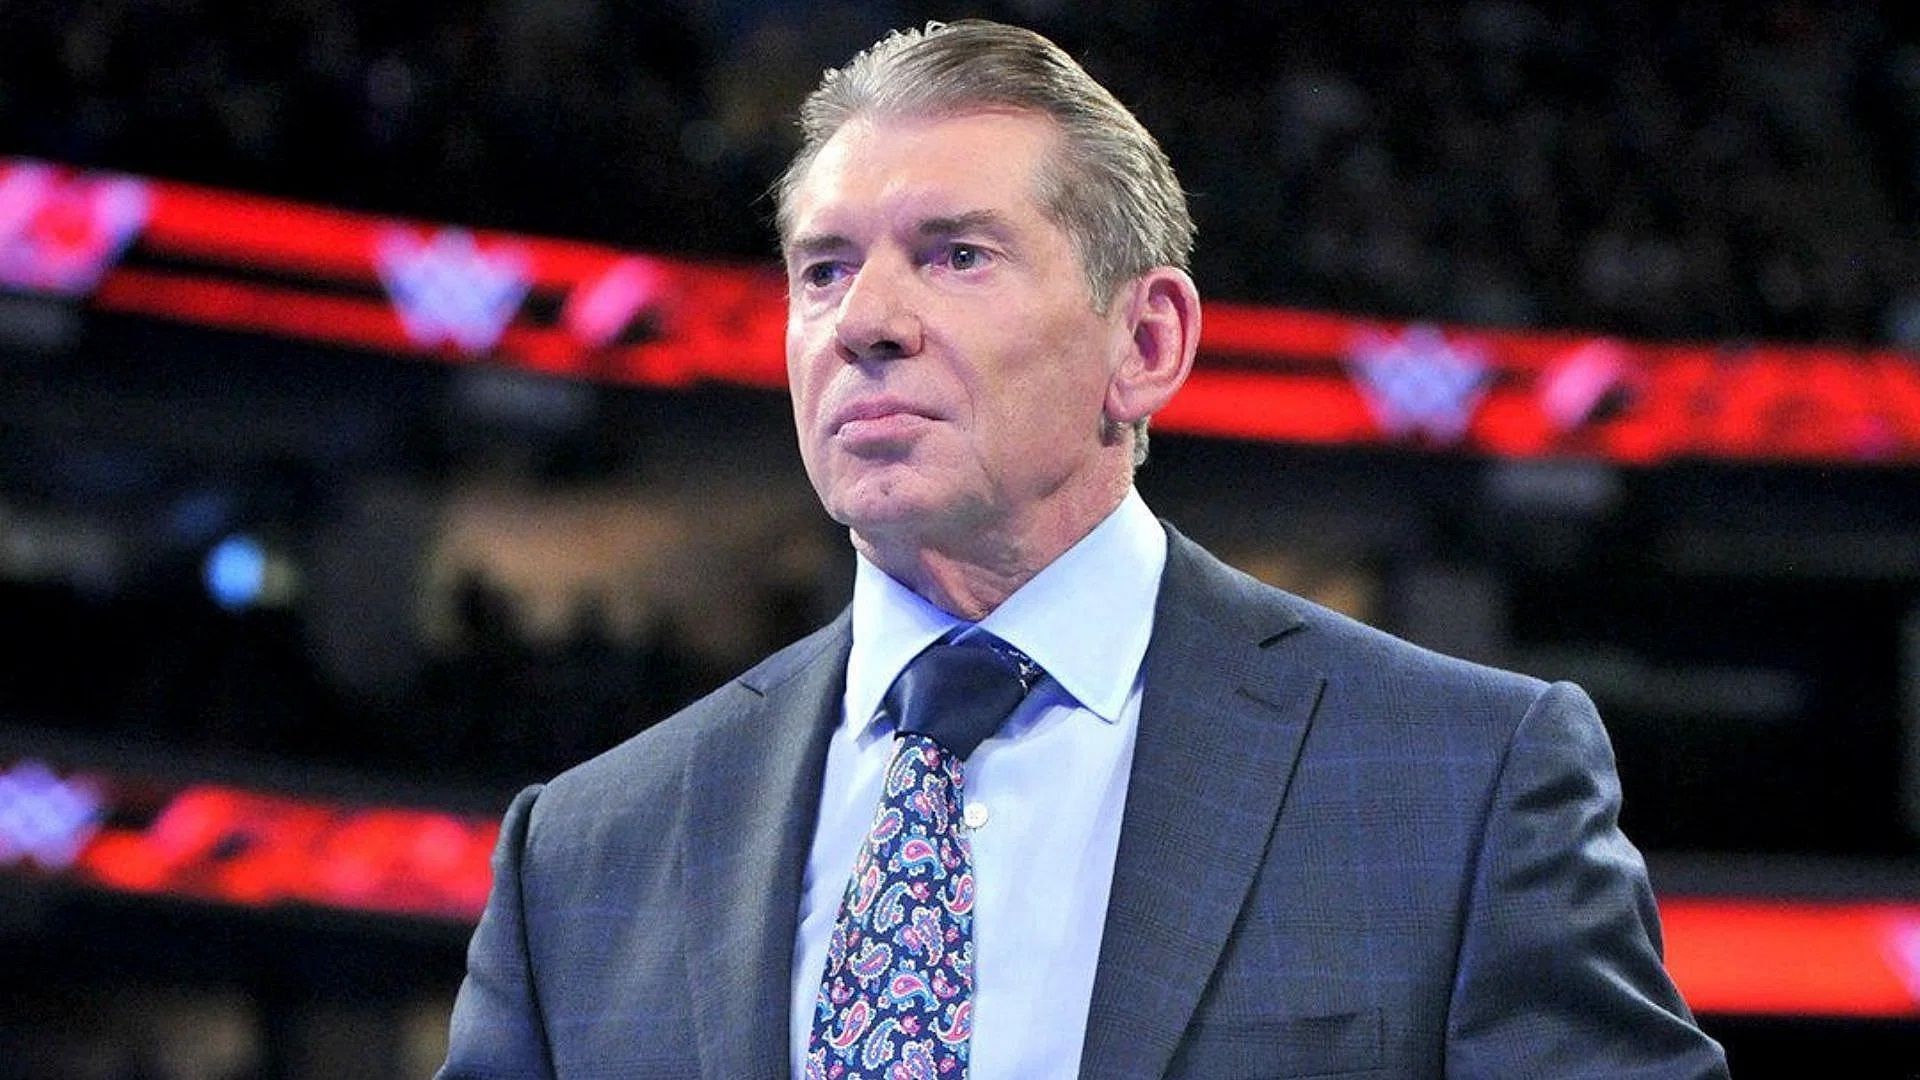 Vince McMahon recently resigned from TKO Group Holdings